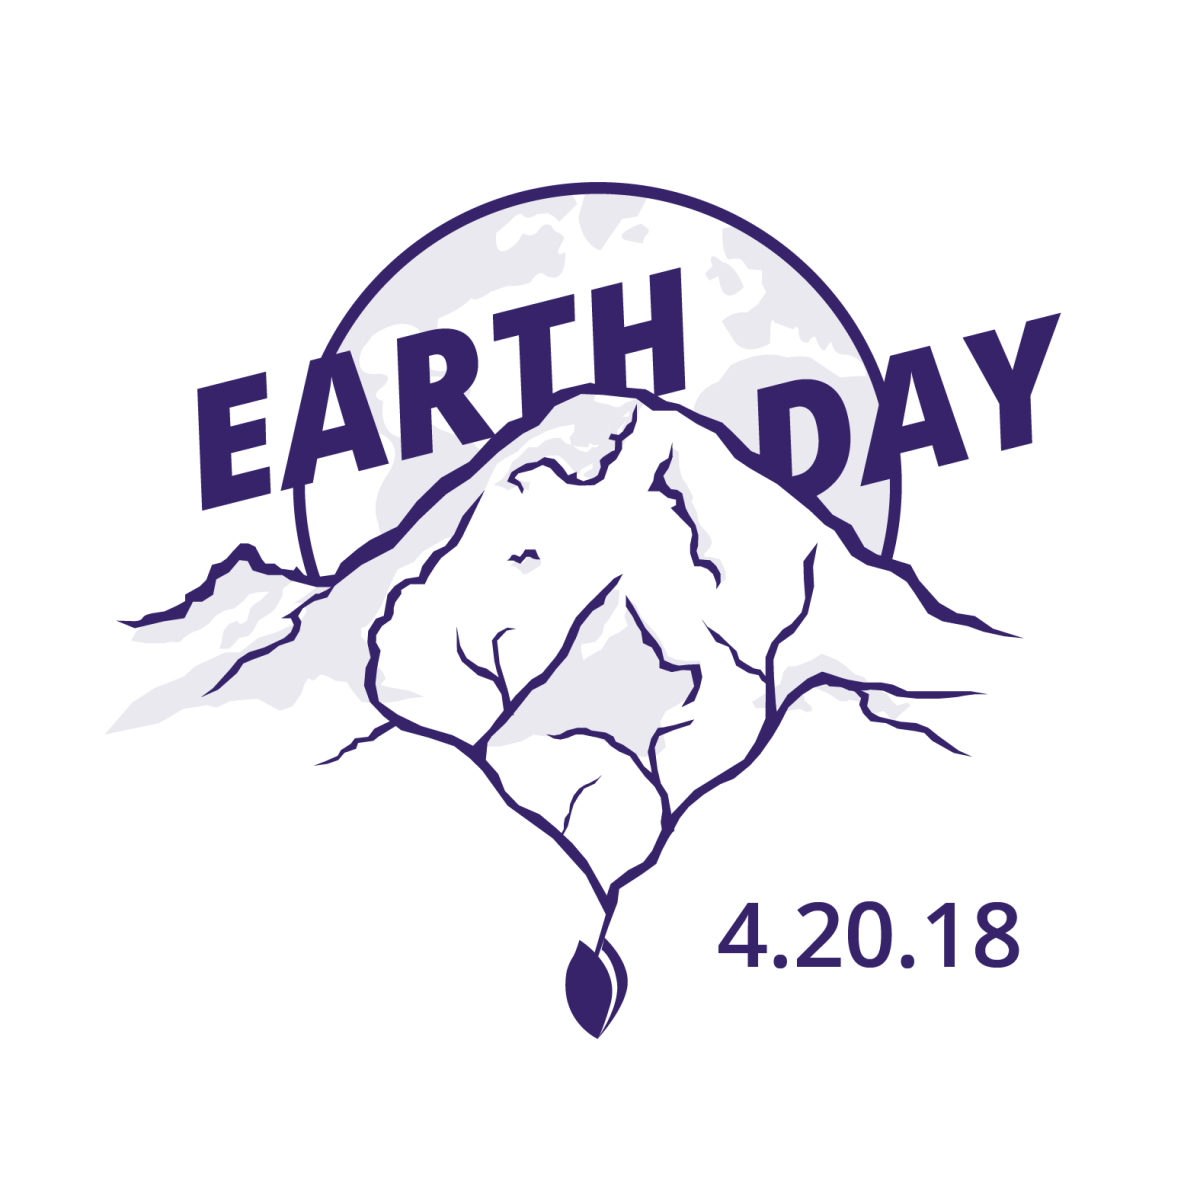 2018 Earth Day logo with date